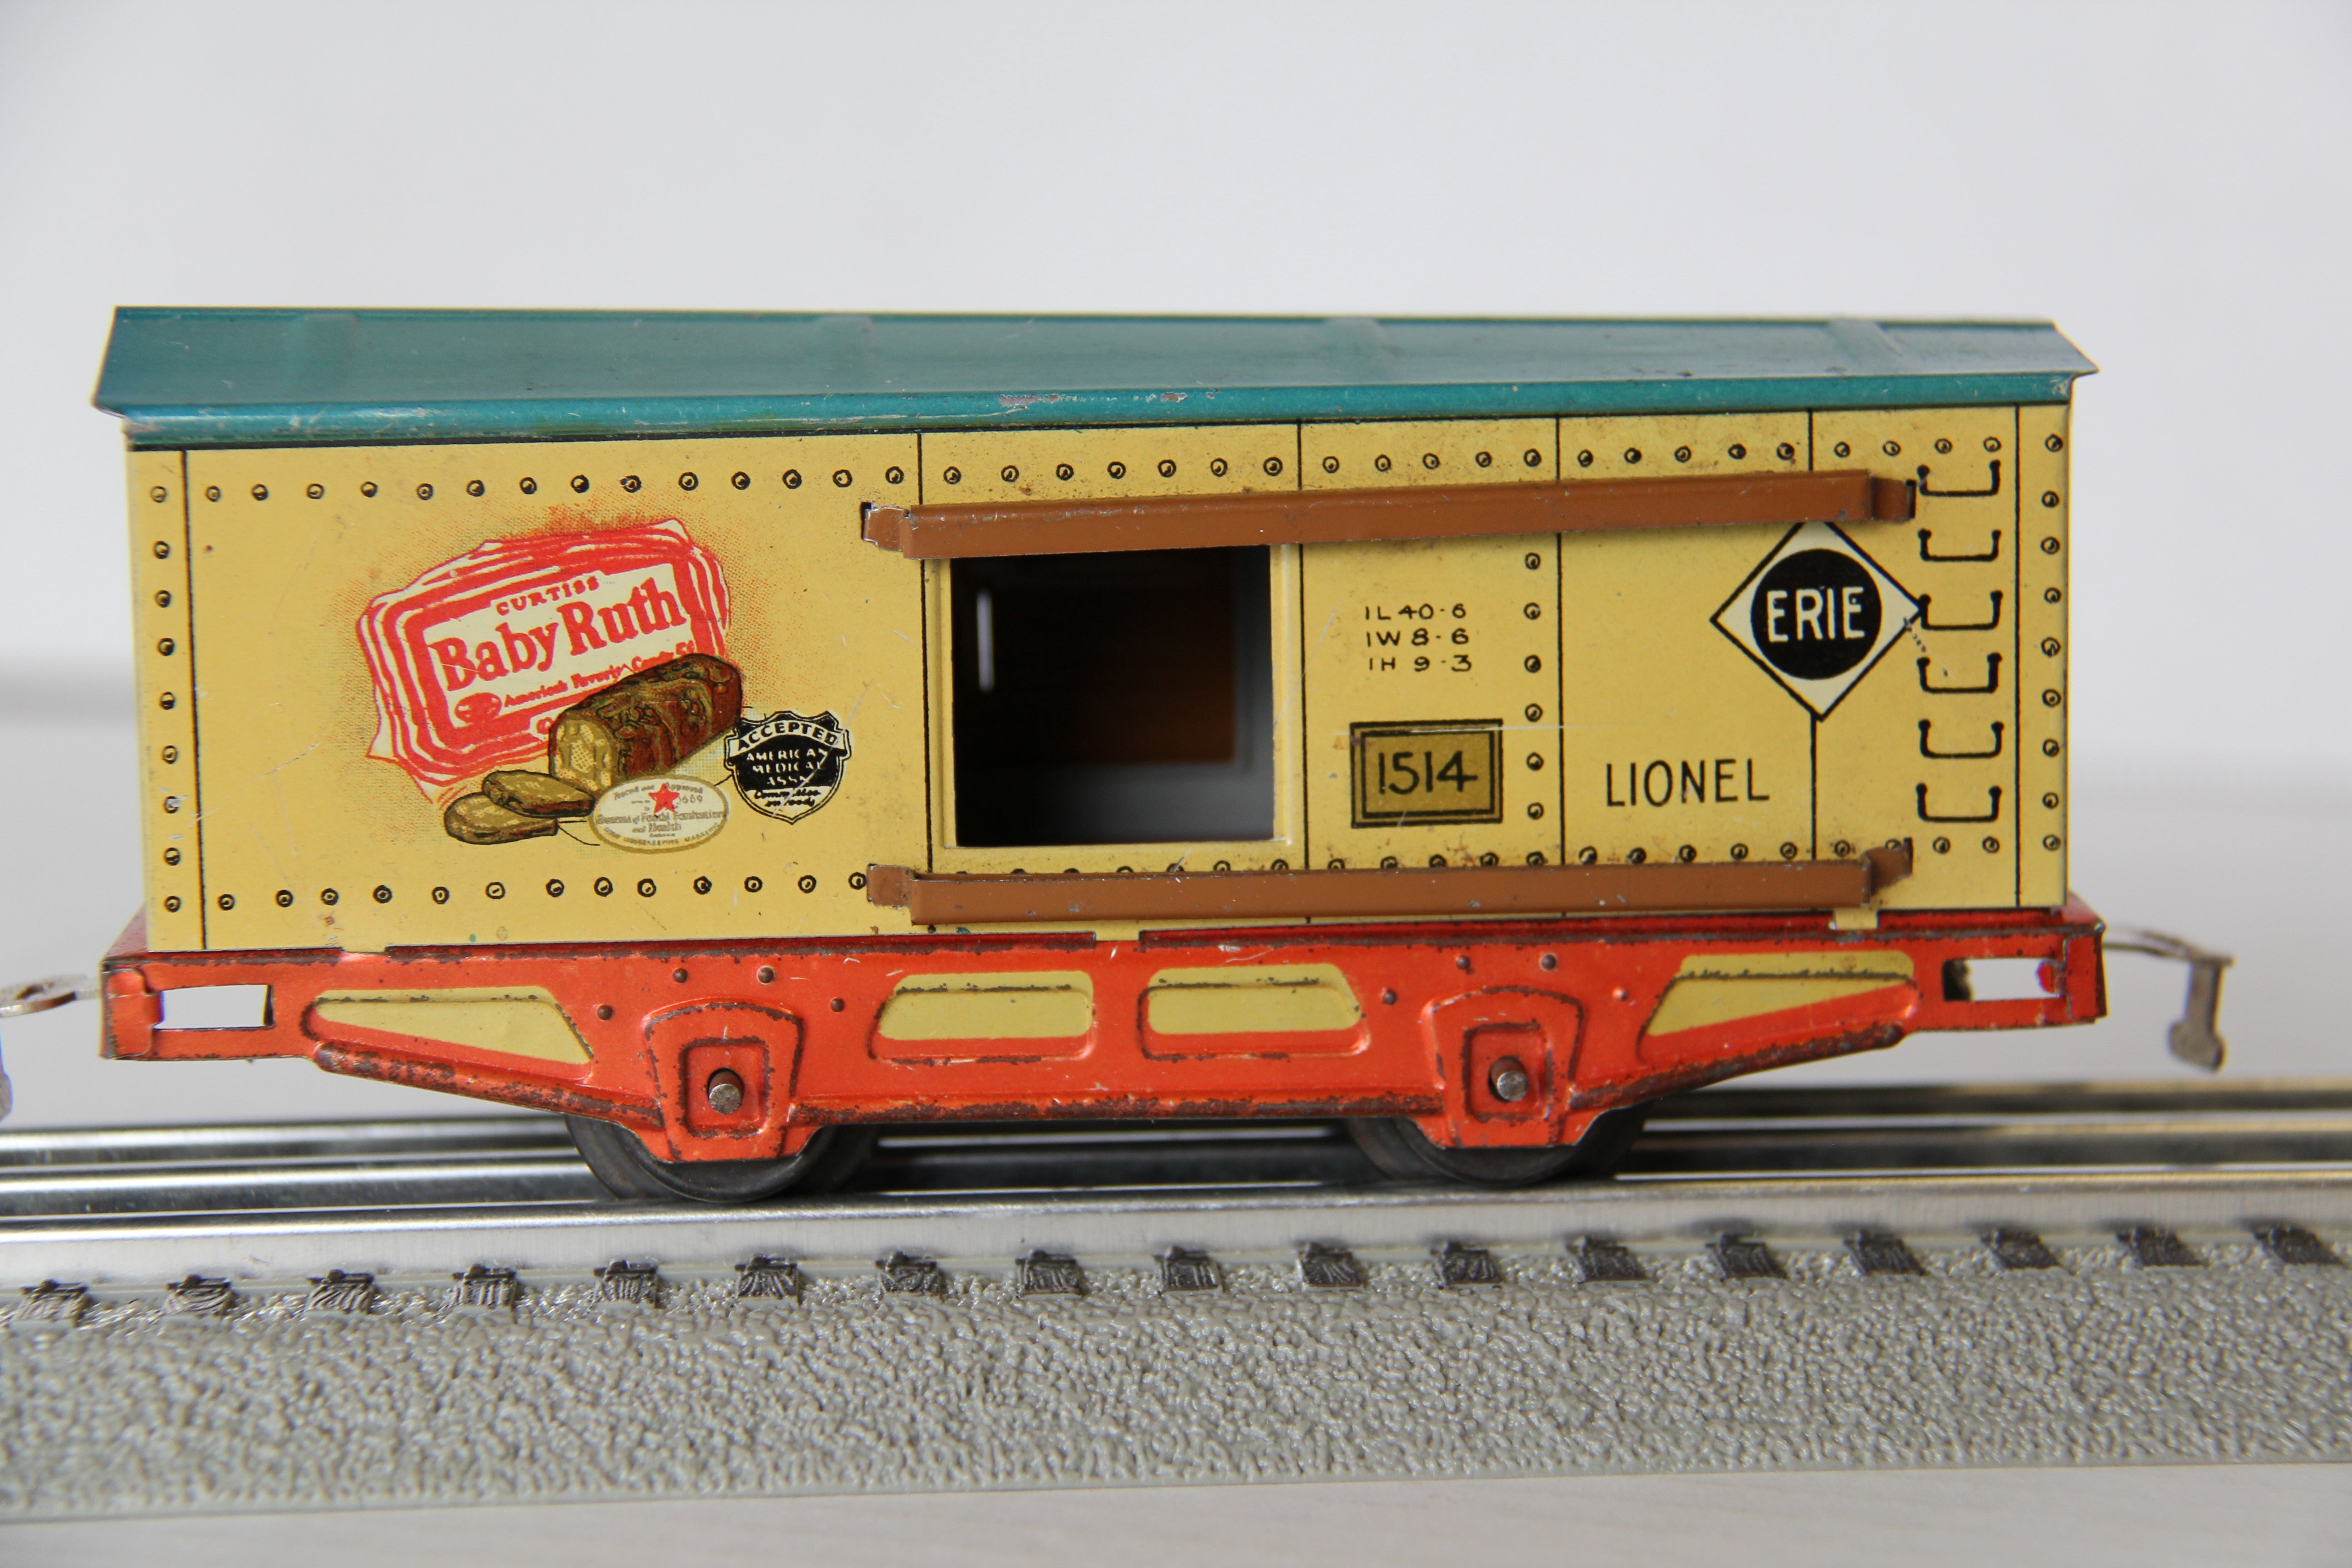 Lionel #1514 Erie "Baby Ruth" Boxcar-Second hand-M4214